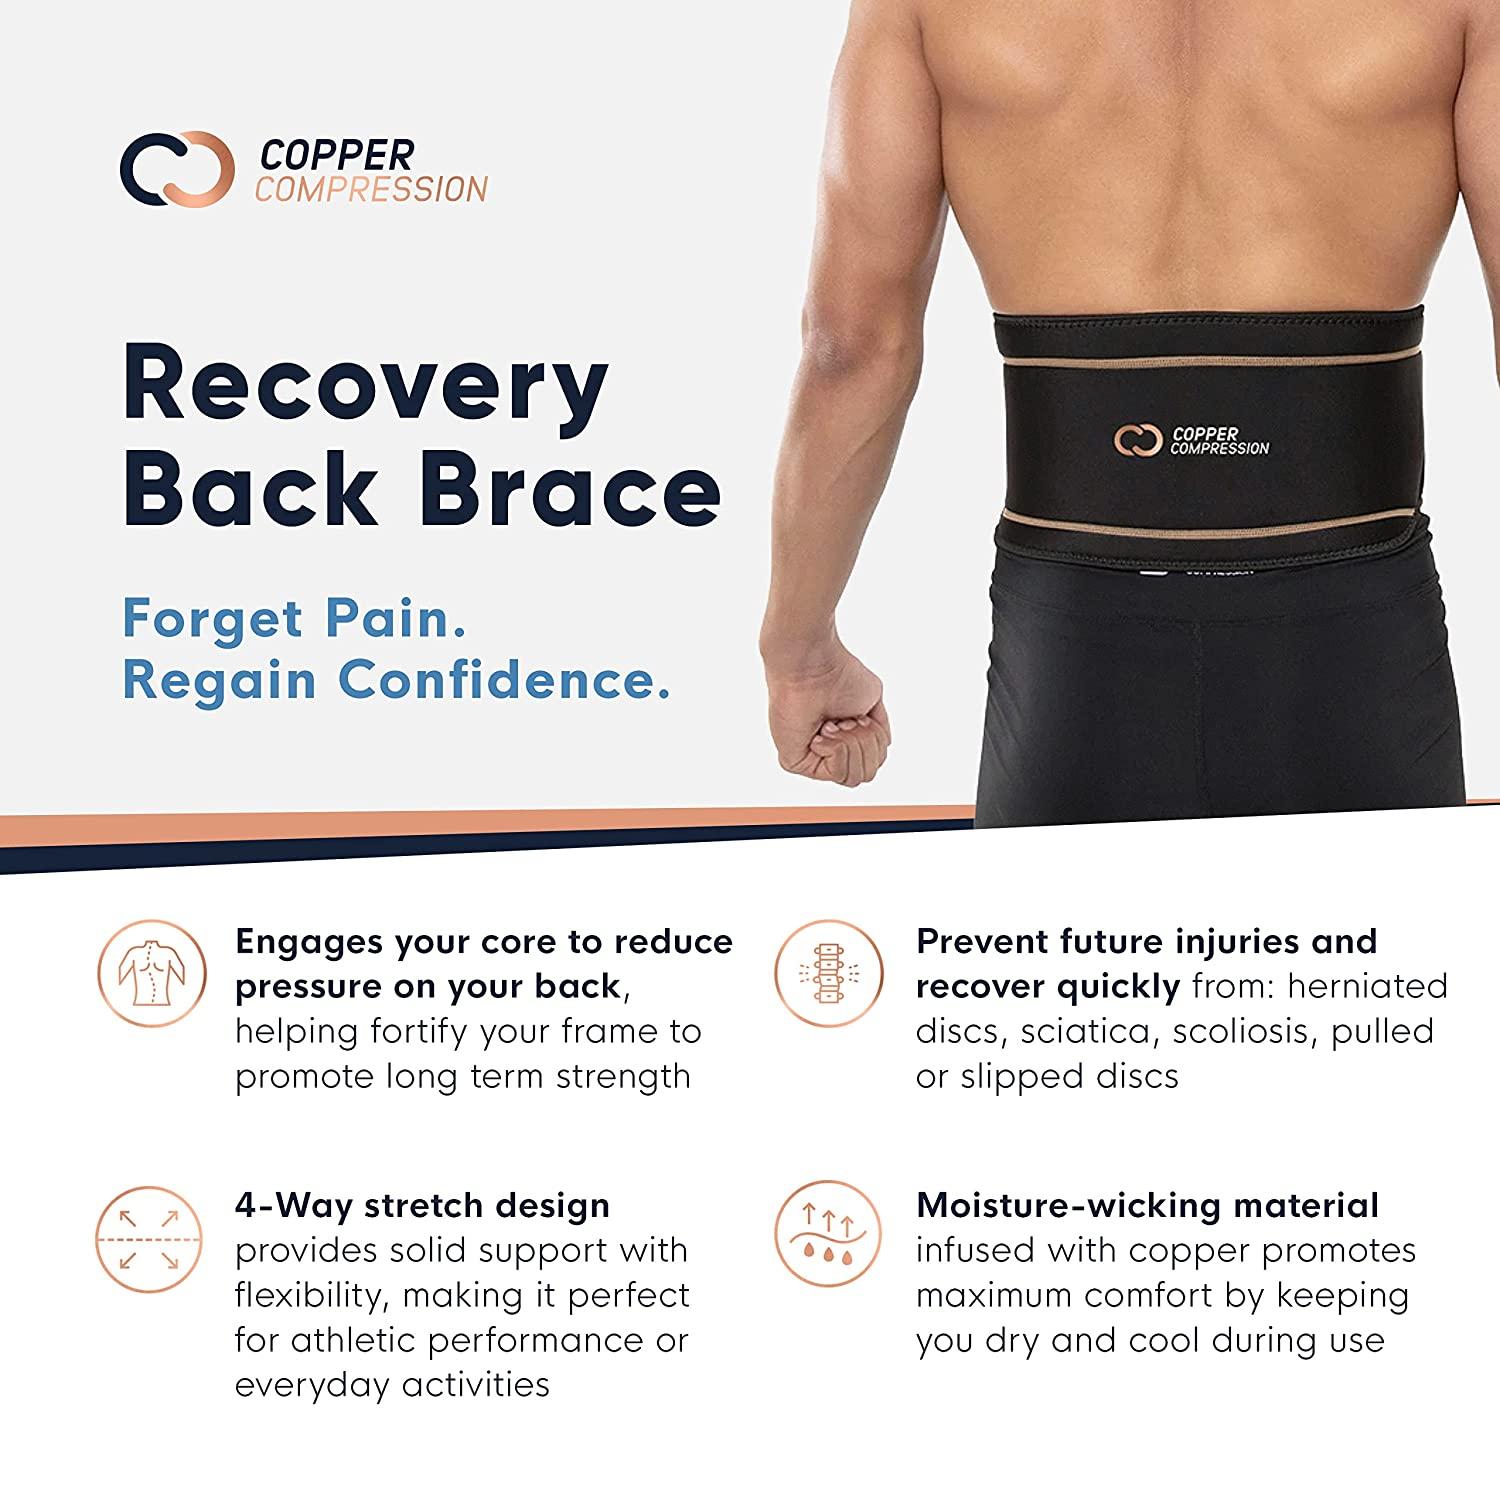 Men's Back Support  Reduce Pain and Promote Back Recovery